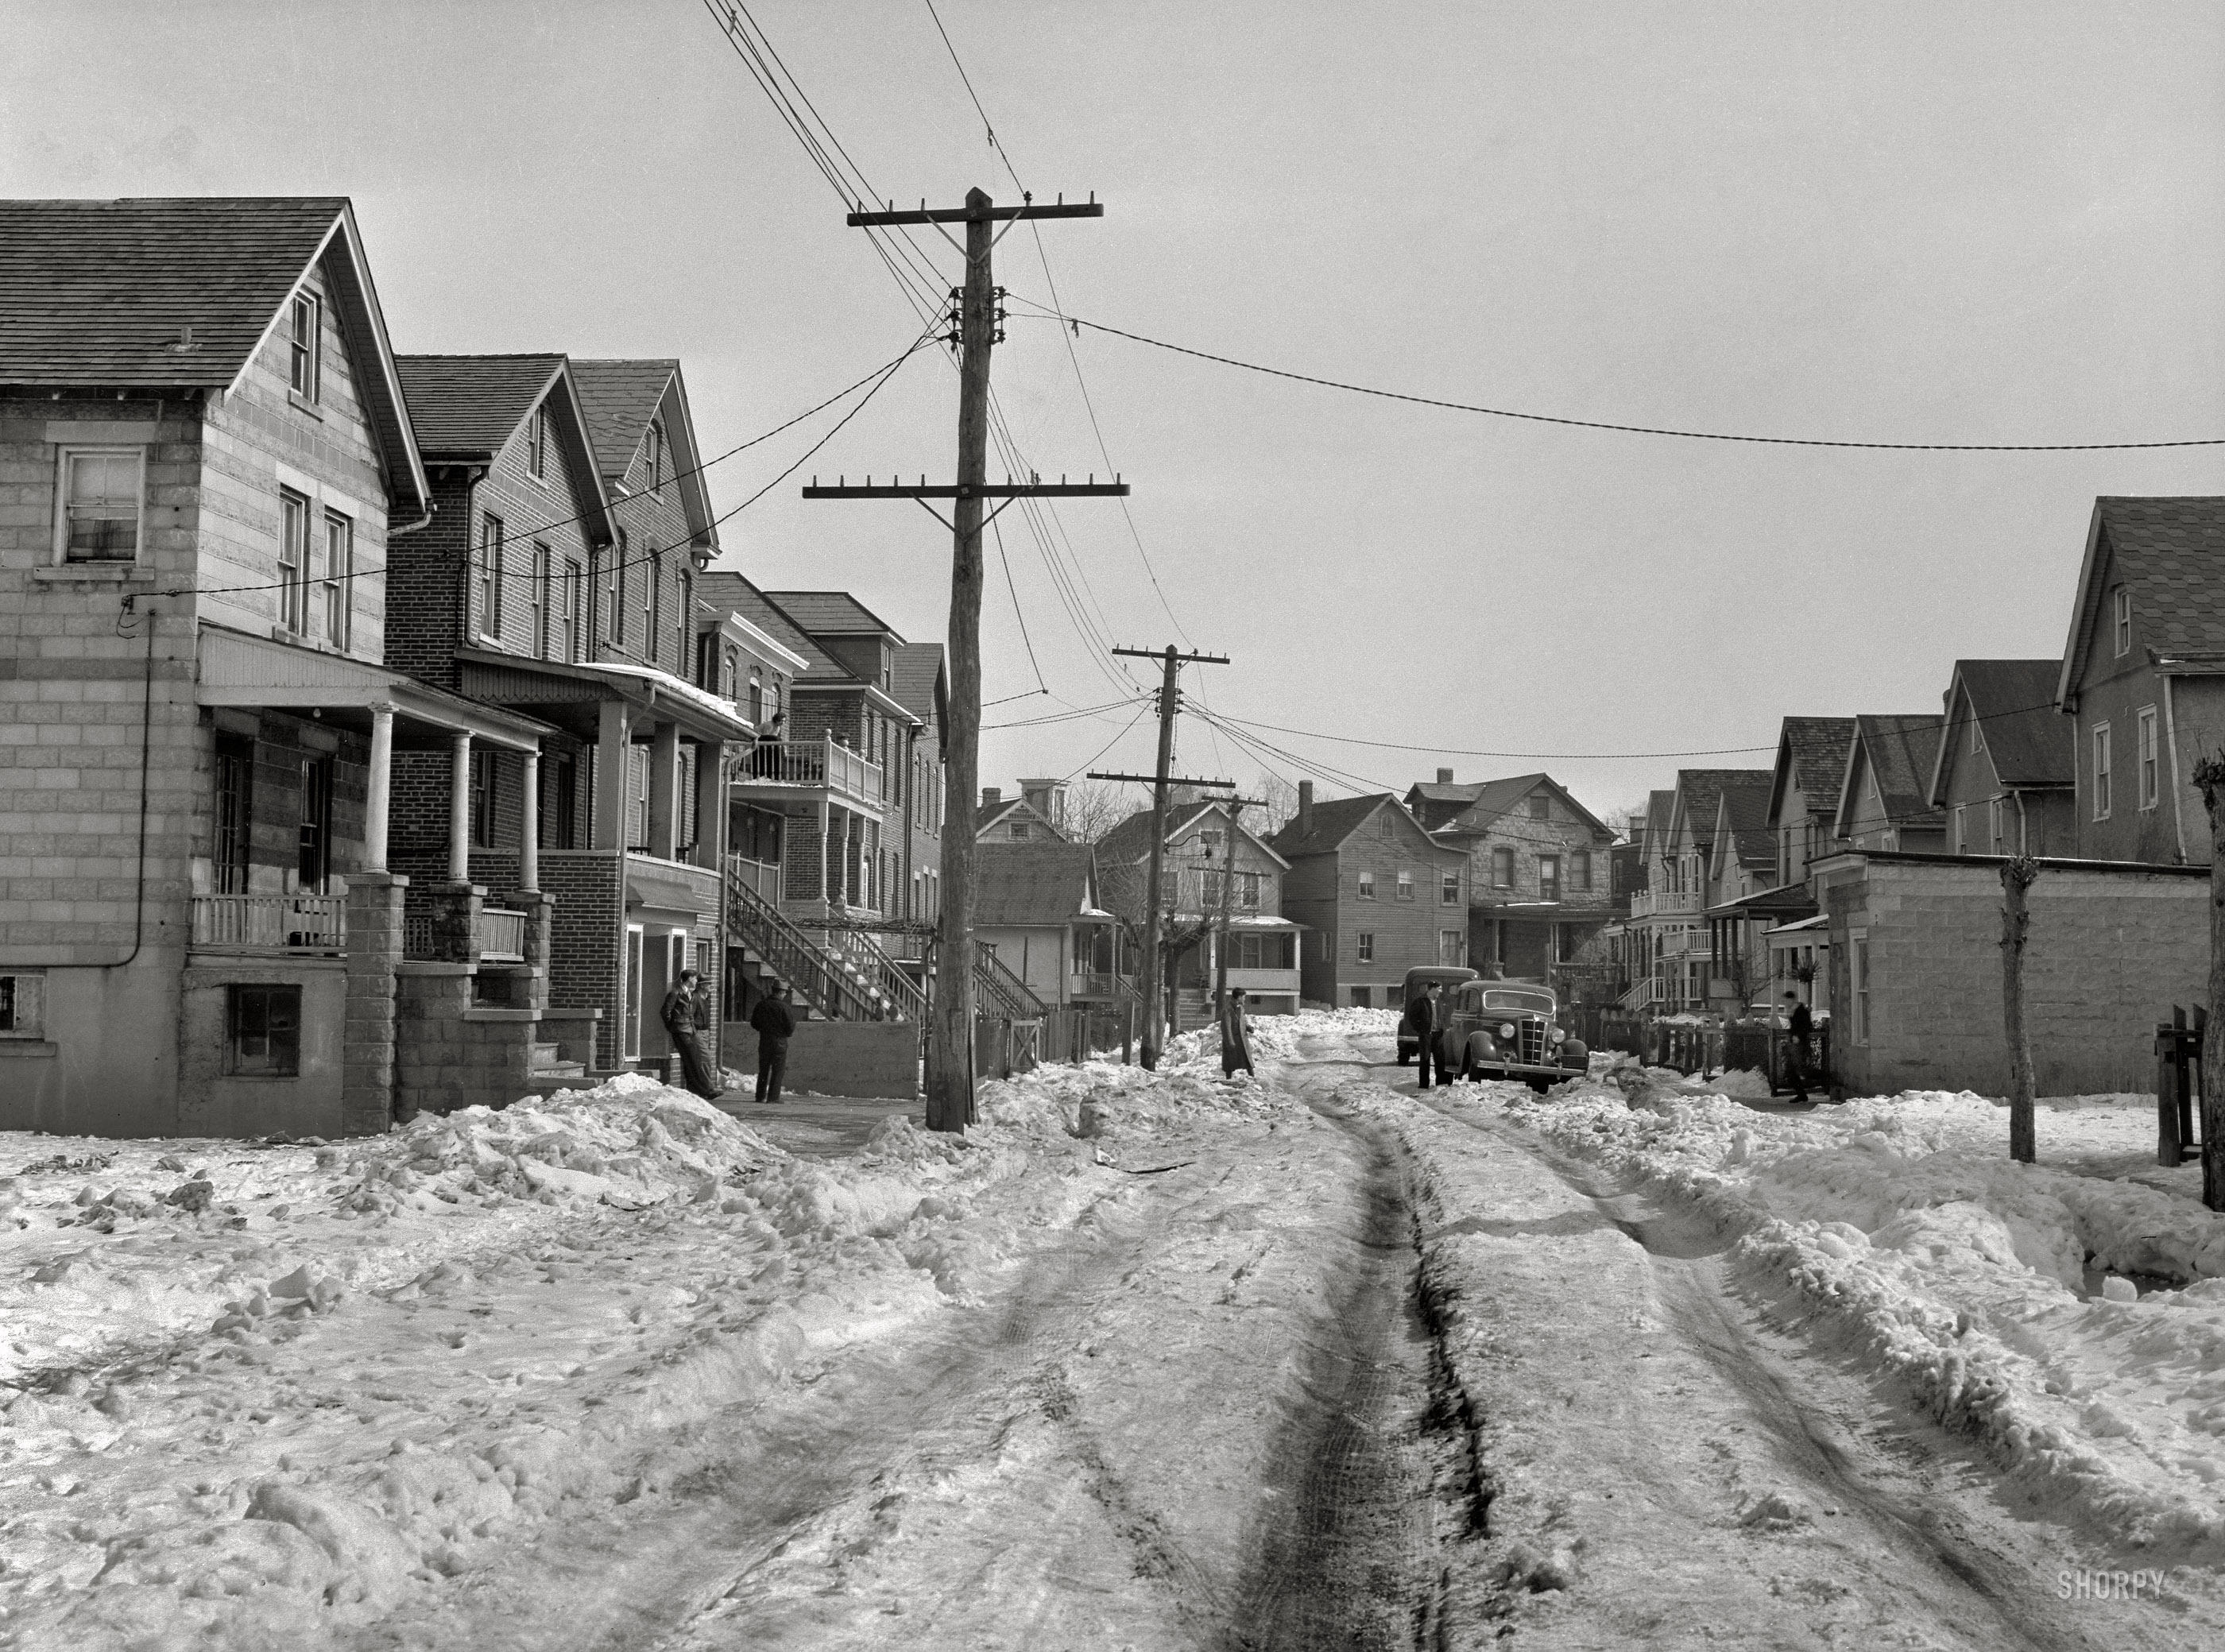 February 1936. "Street in Bound Brook, New Jersey, showing crowded conditions." Medium-format nitrate negative by Carl Mydans. View full size